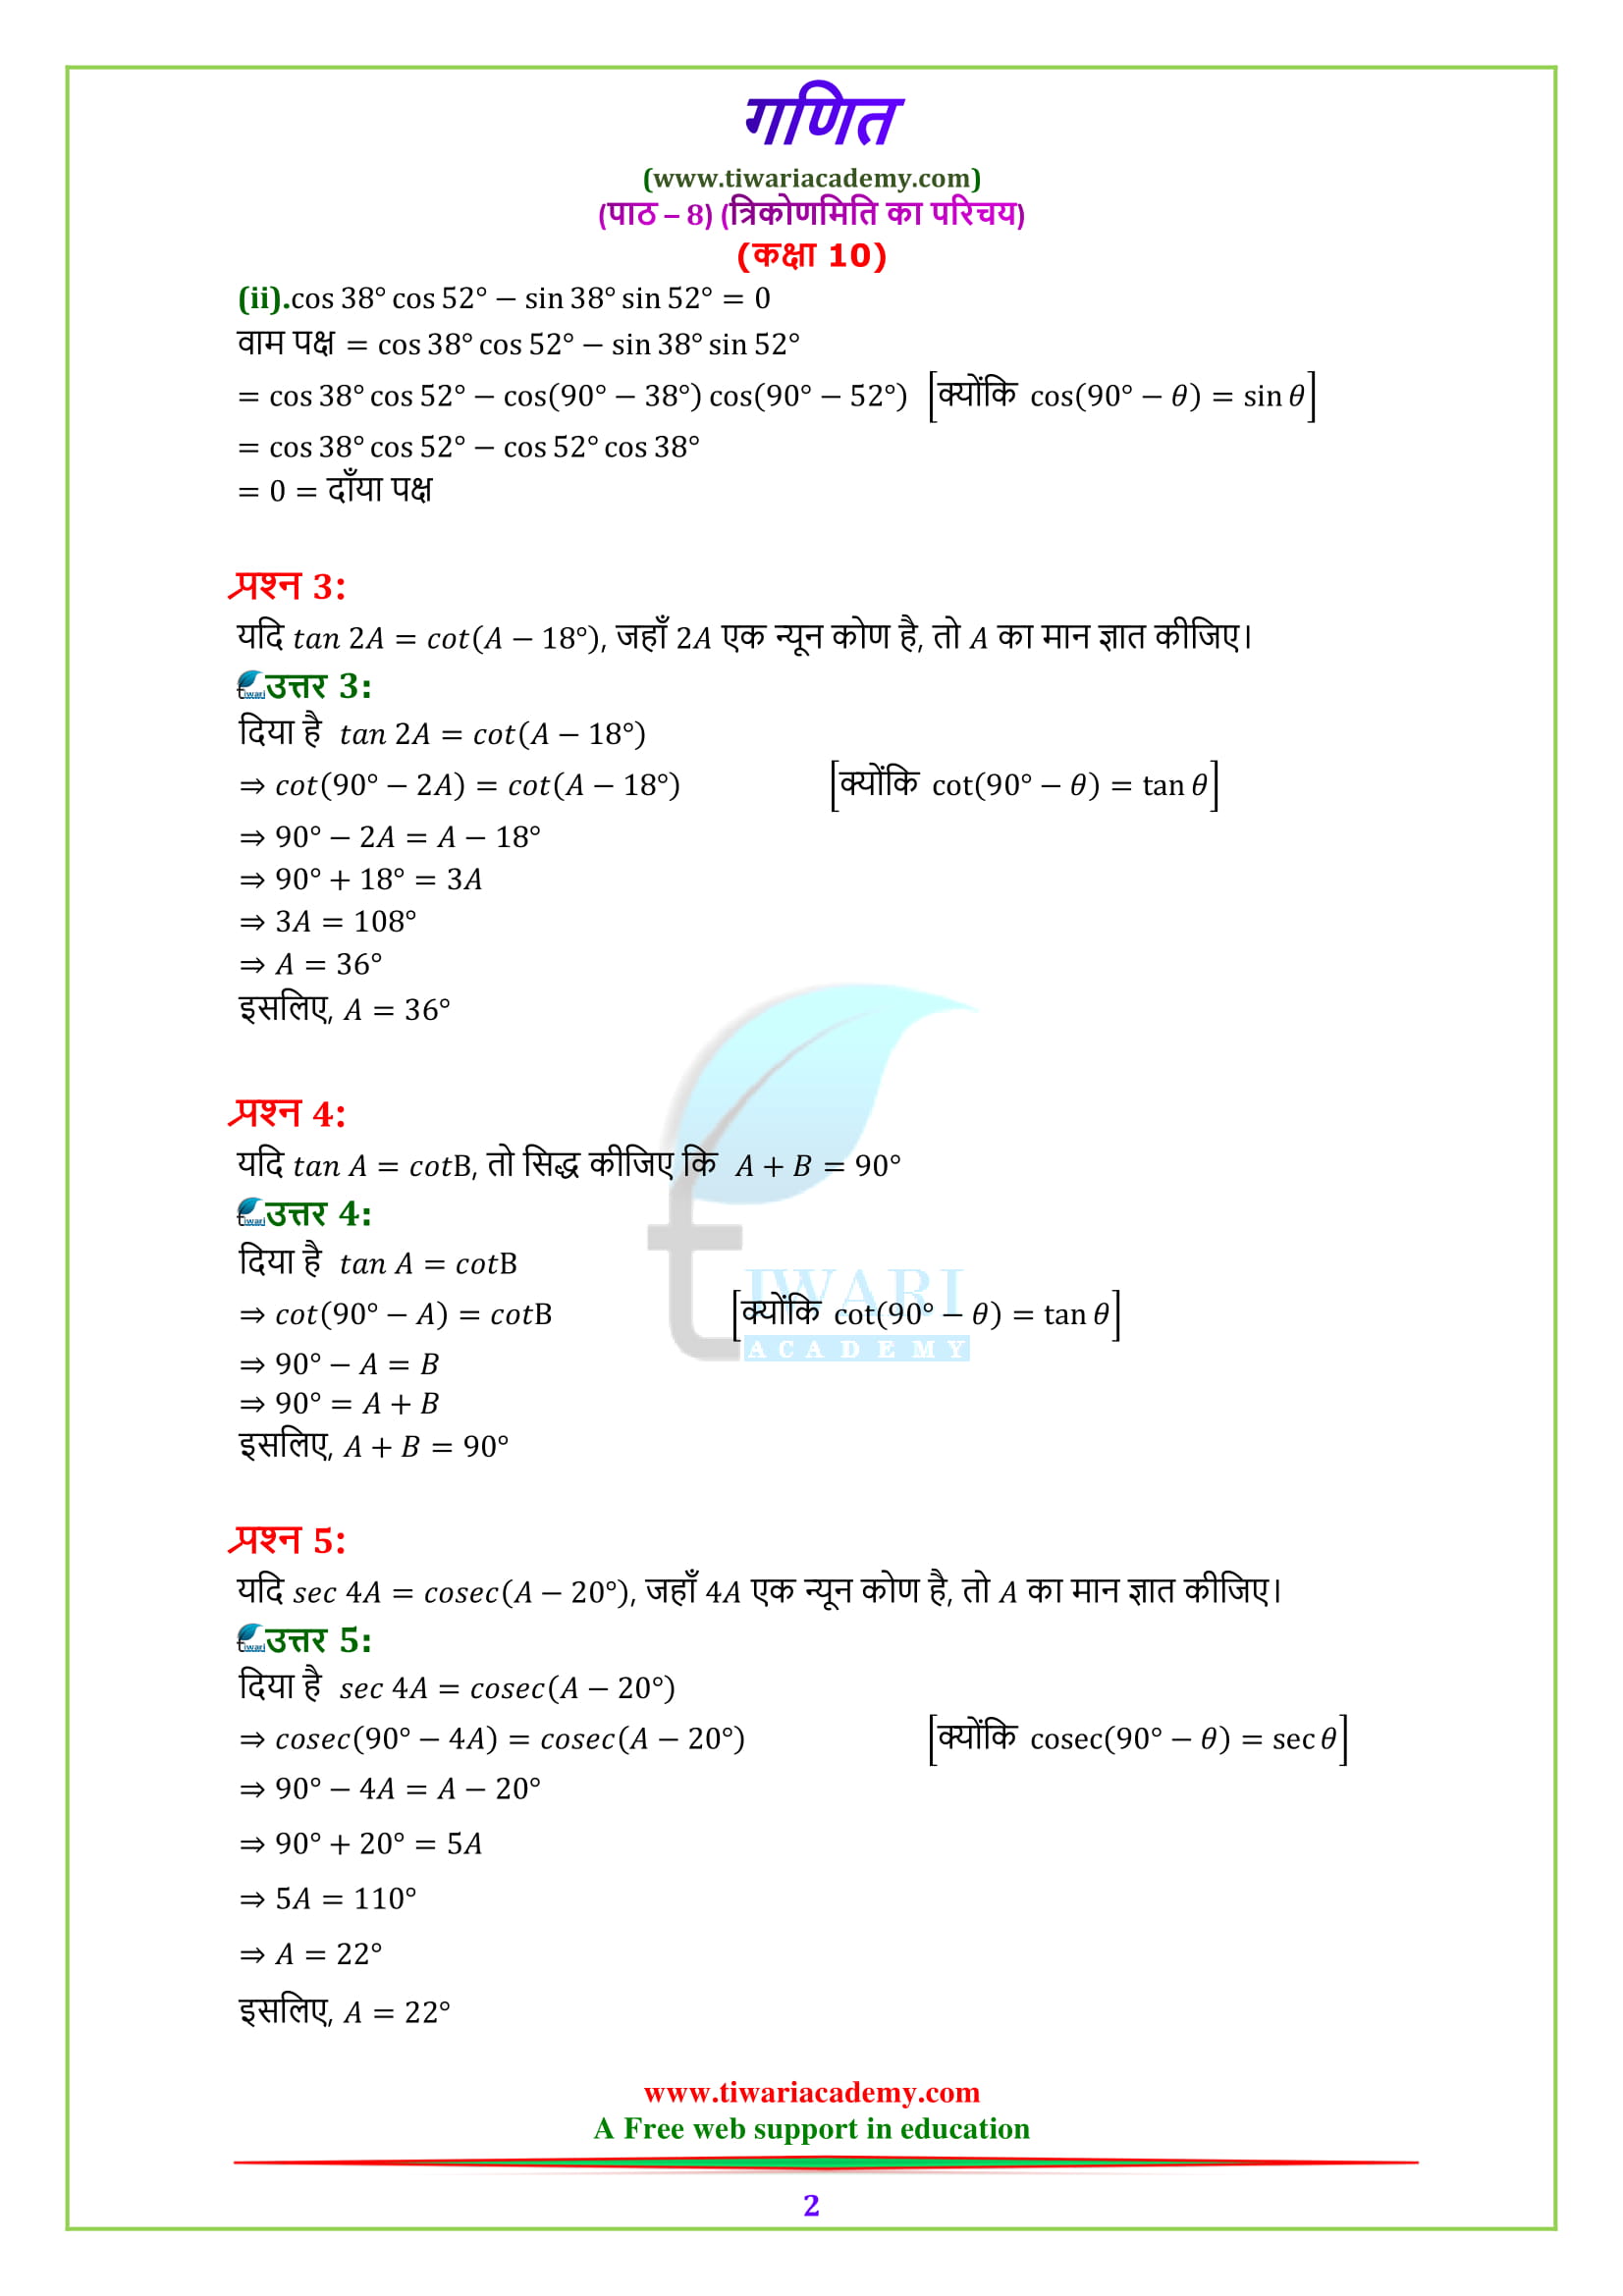 NCERT Solutions for class 10 Maths Chapter 8 Exercise 8.3 questions 1, 2, 3, 4, 5